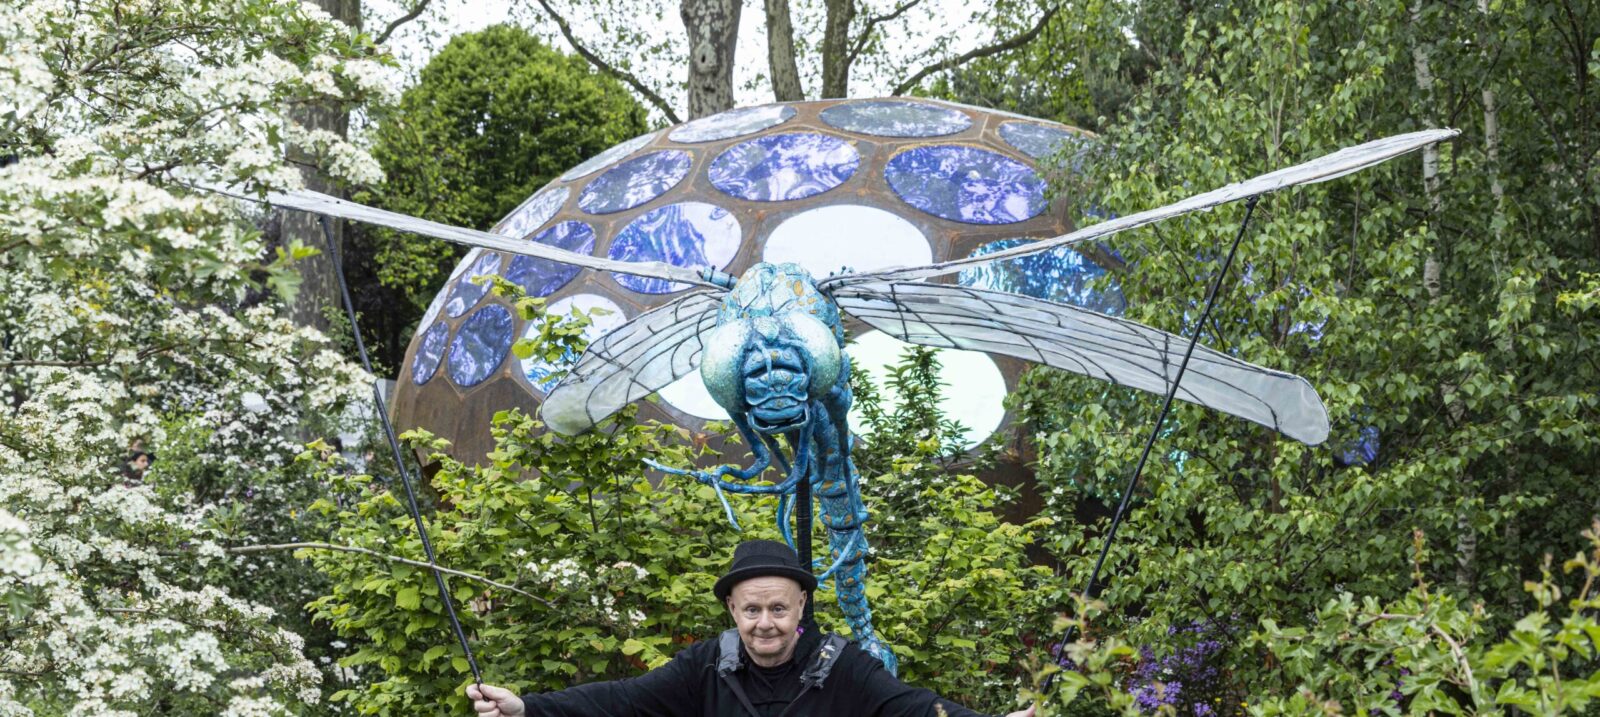 Fetch Theatre with giant dragonfly on the RES garden. Photo by Tammy Marlar